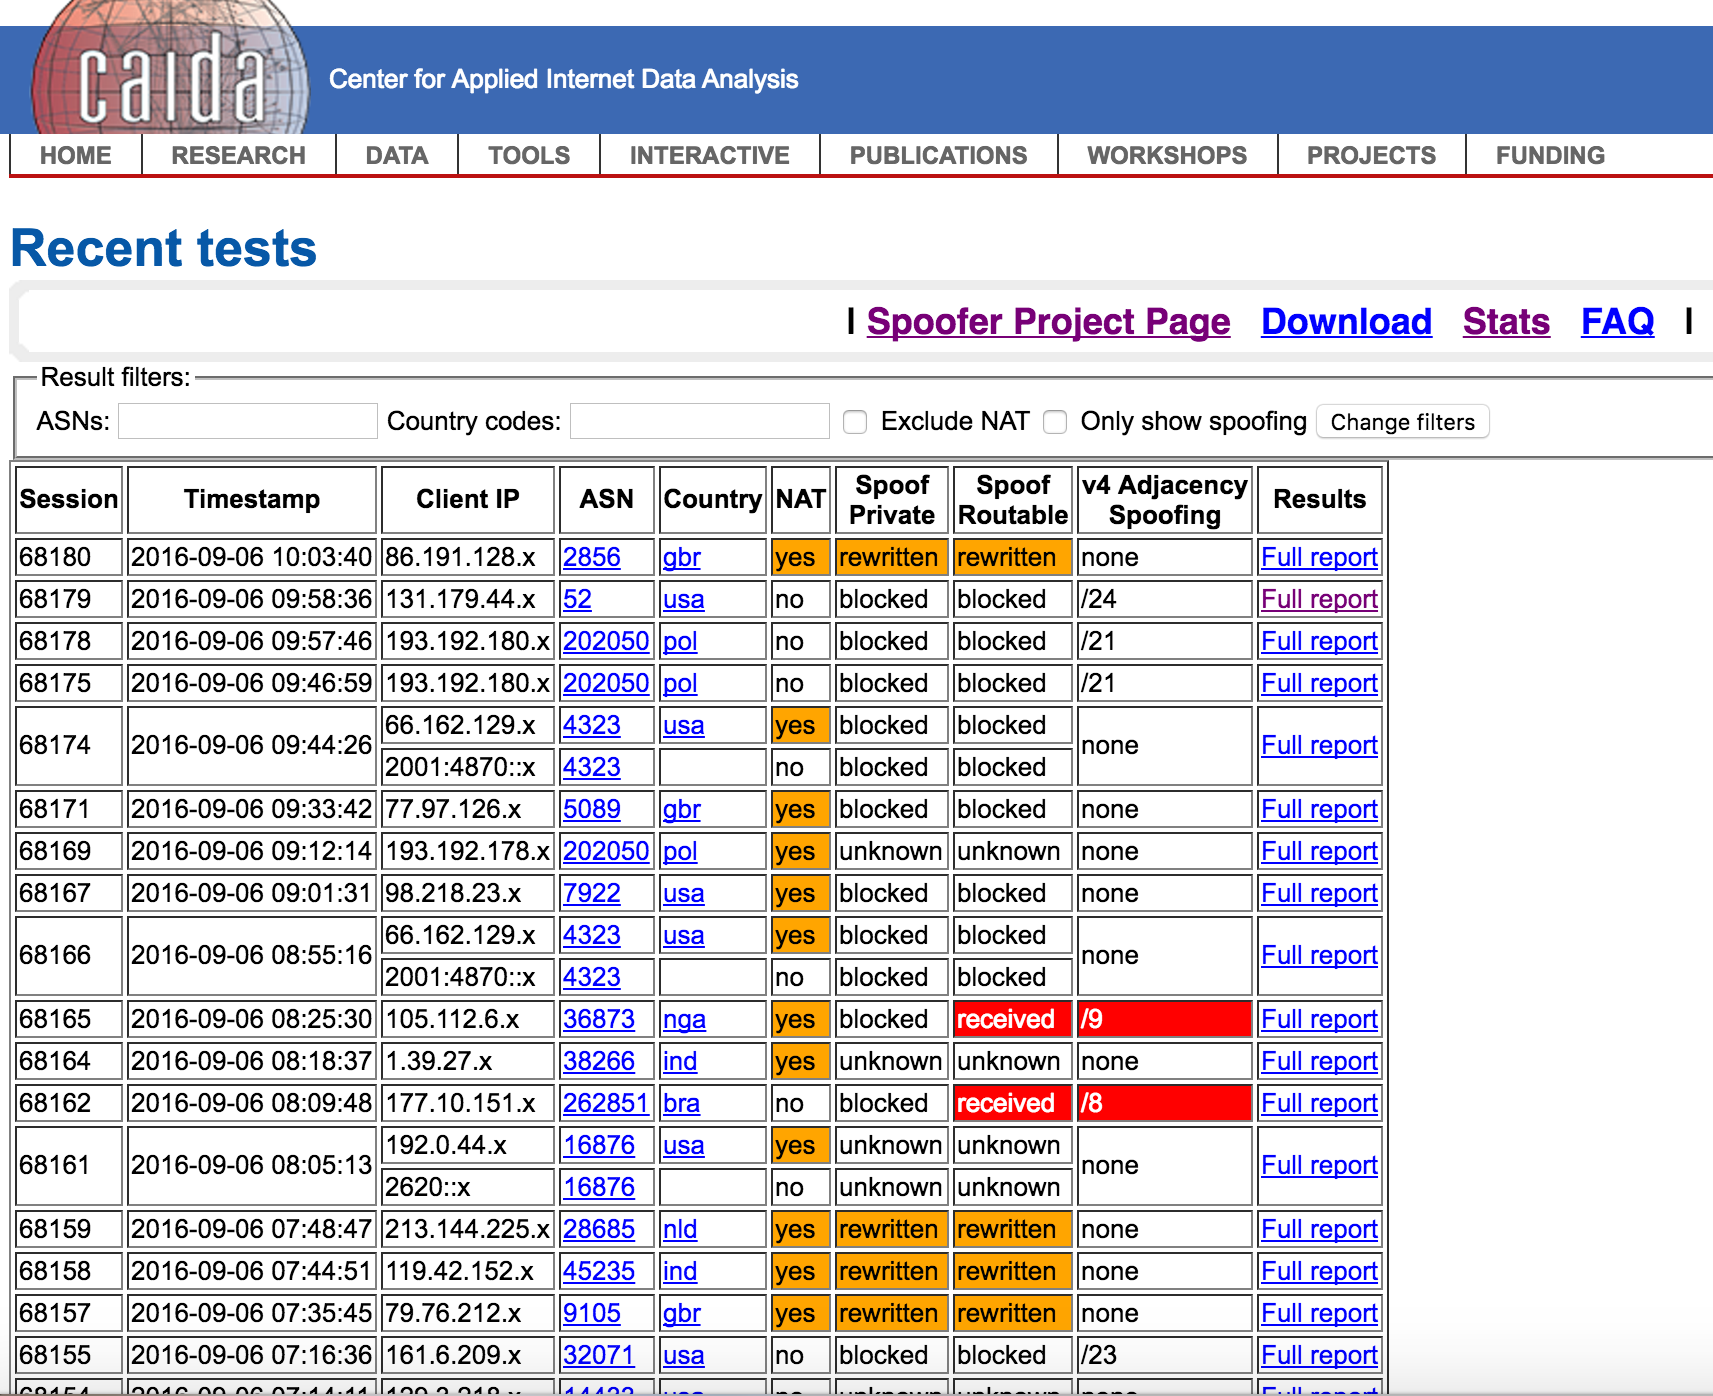 A <a href="https://spoofer.caida.org/recent_tests.php" target="_blank">recent test</a> ran on Spoofer Project